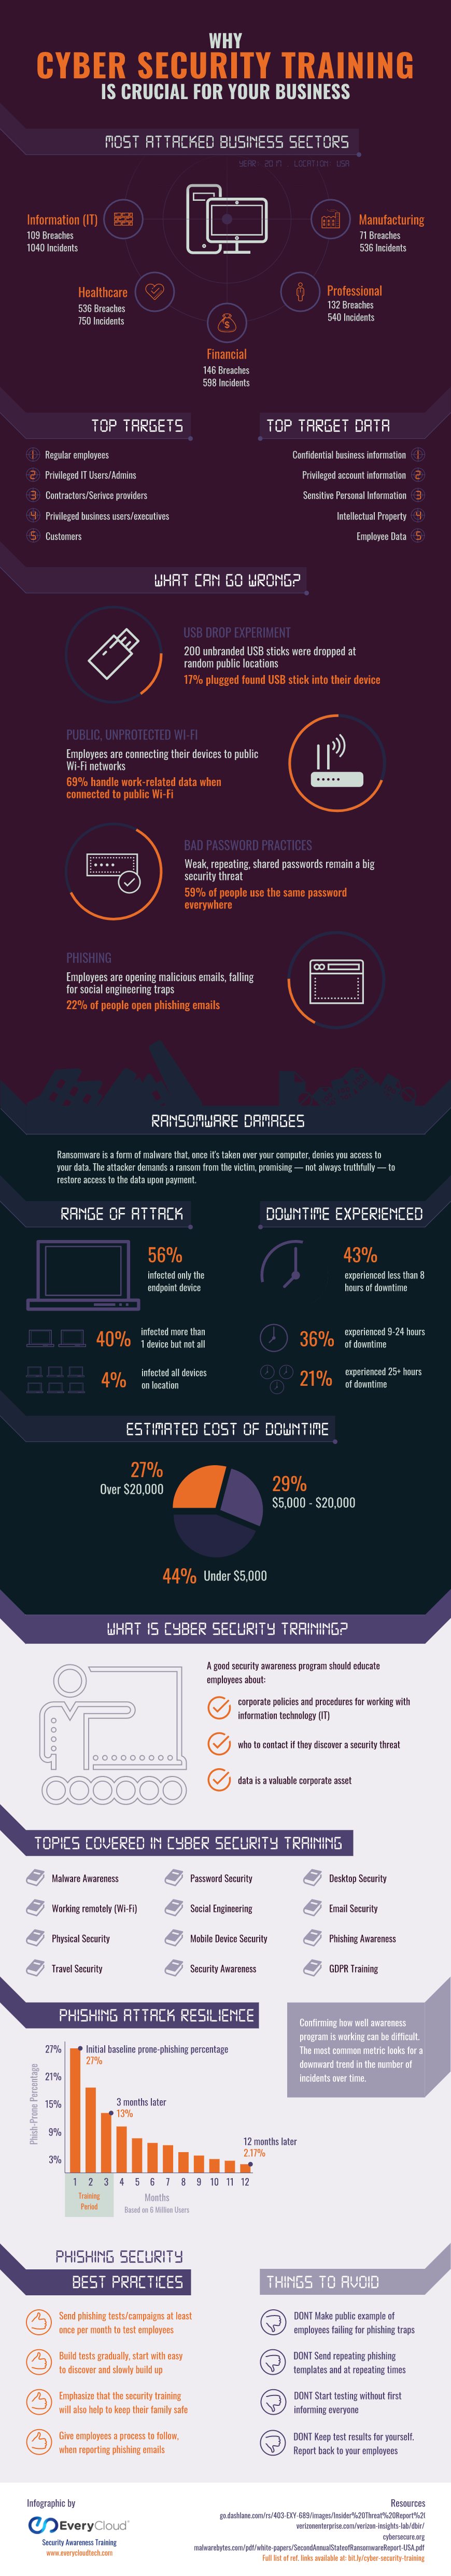 Cyber Security Training Infogrpahic